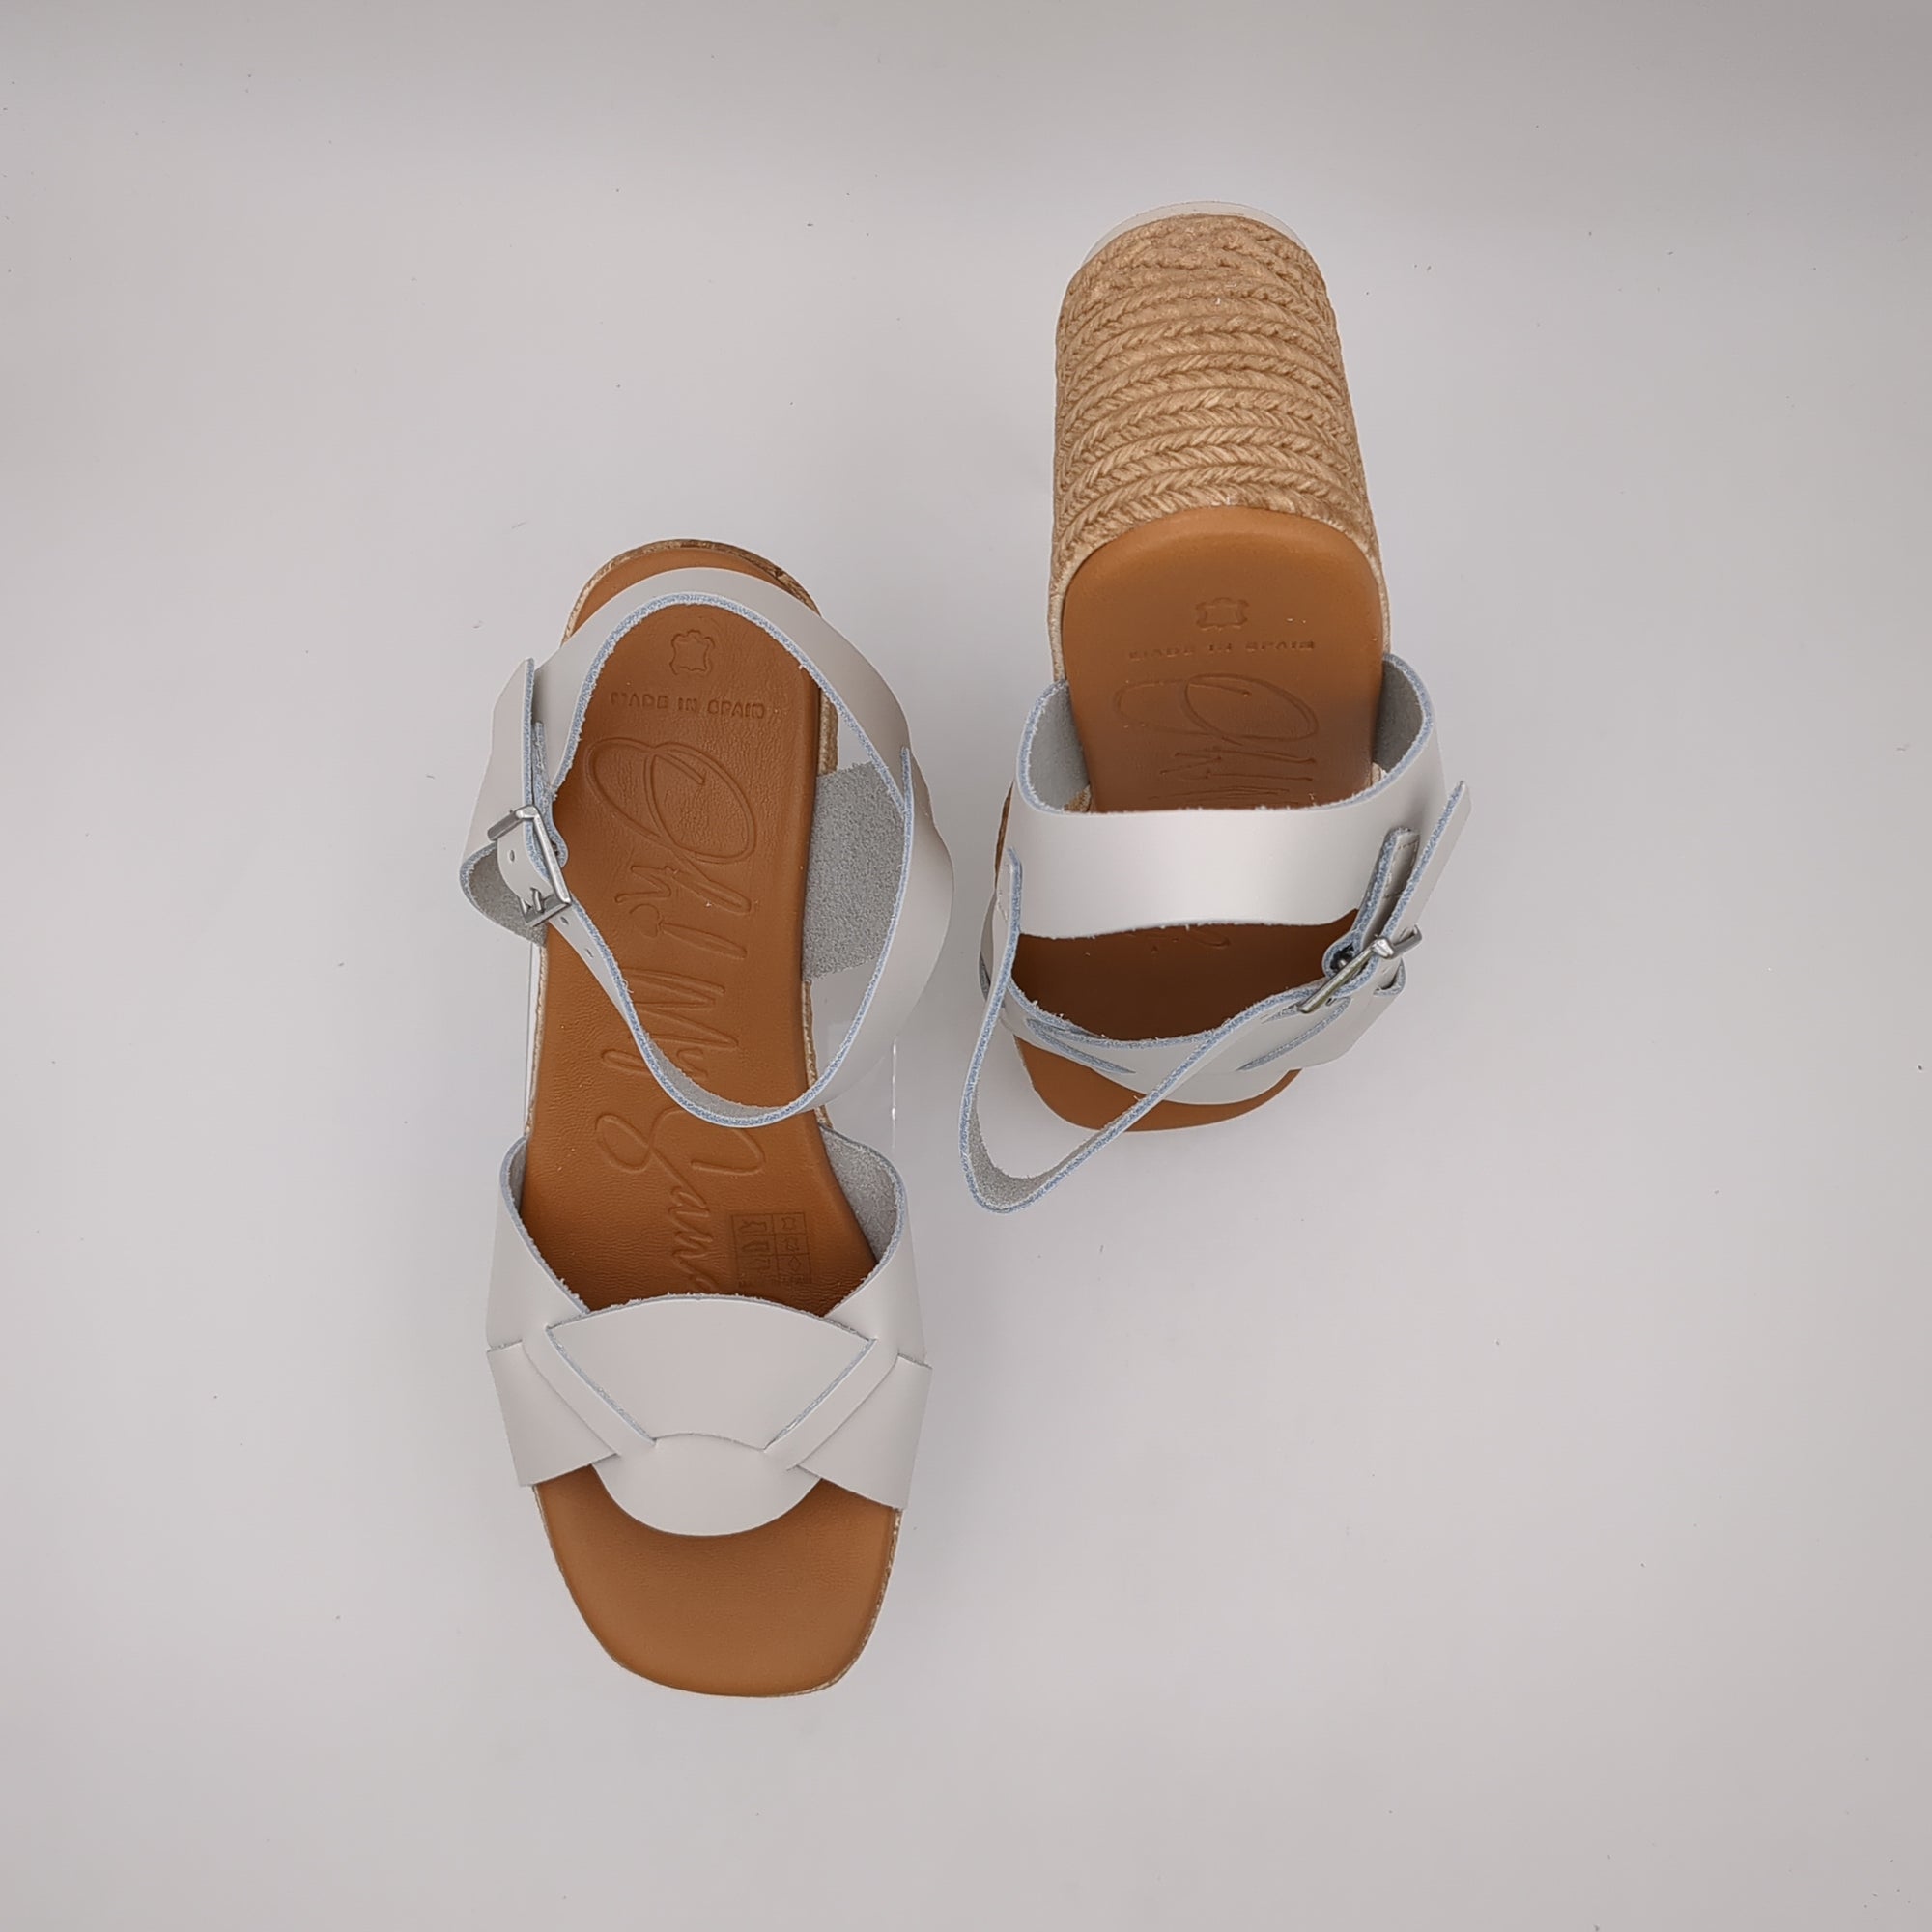 Oh My Sandals 5460 HIELO Cream Wedge Sandals with Memory Foam and Faux Rope Detail